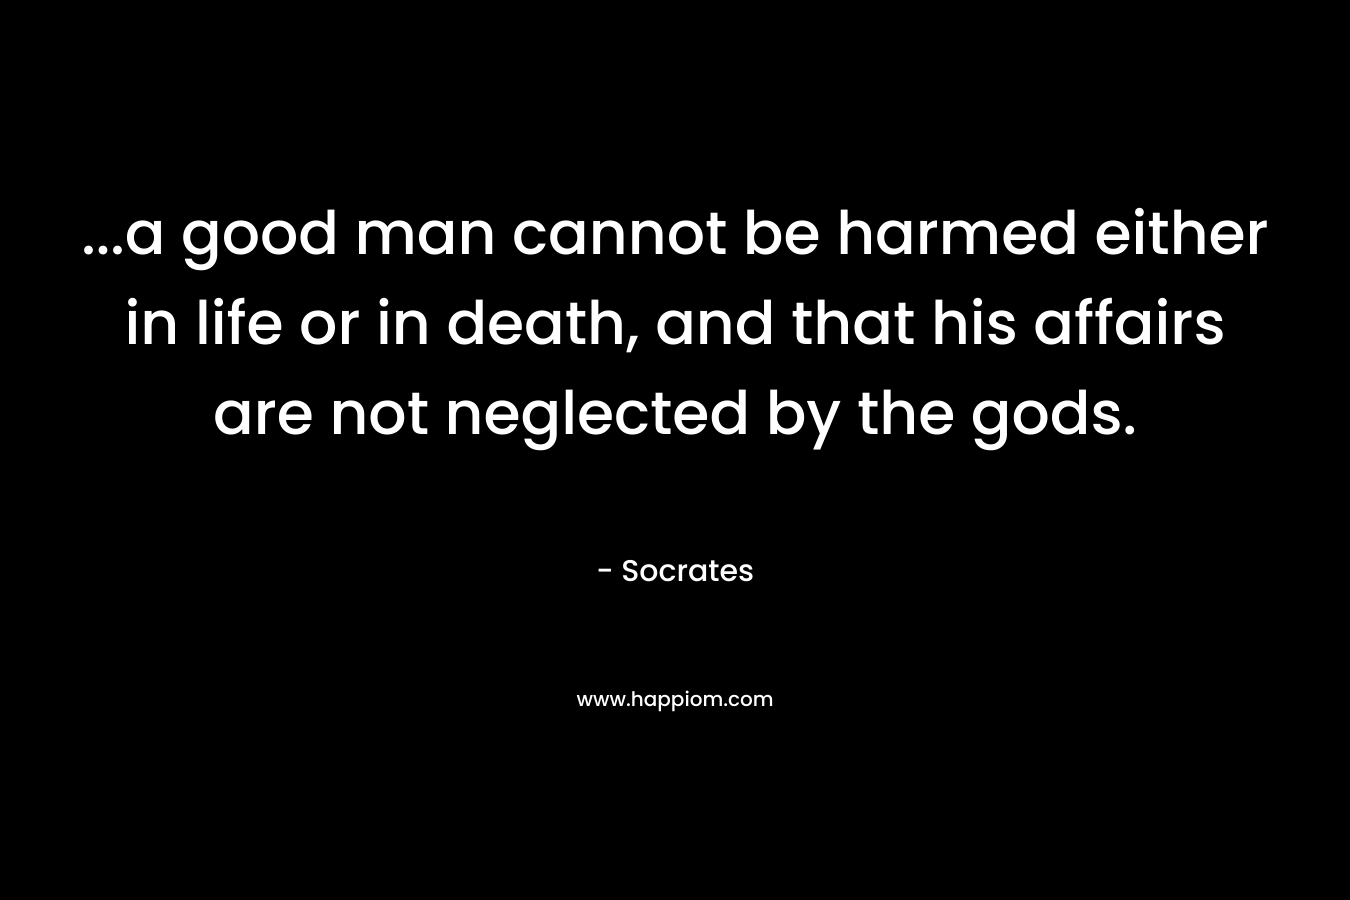 …a good man cannot be harmed either in life or in death, and that his affairs are not neglected by the gods. – Socrates